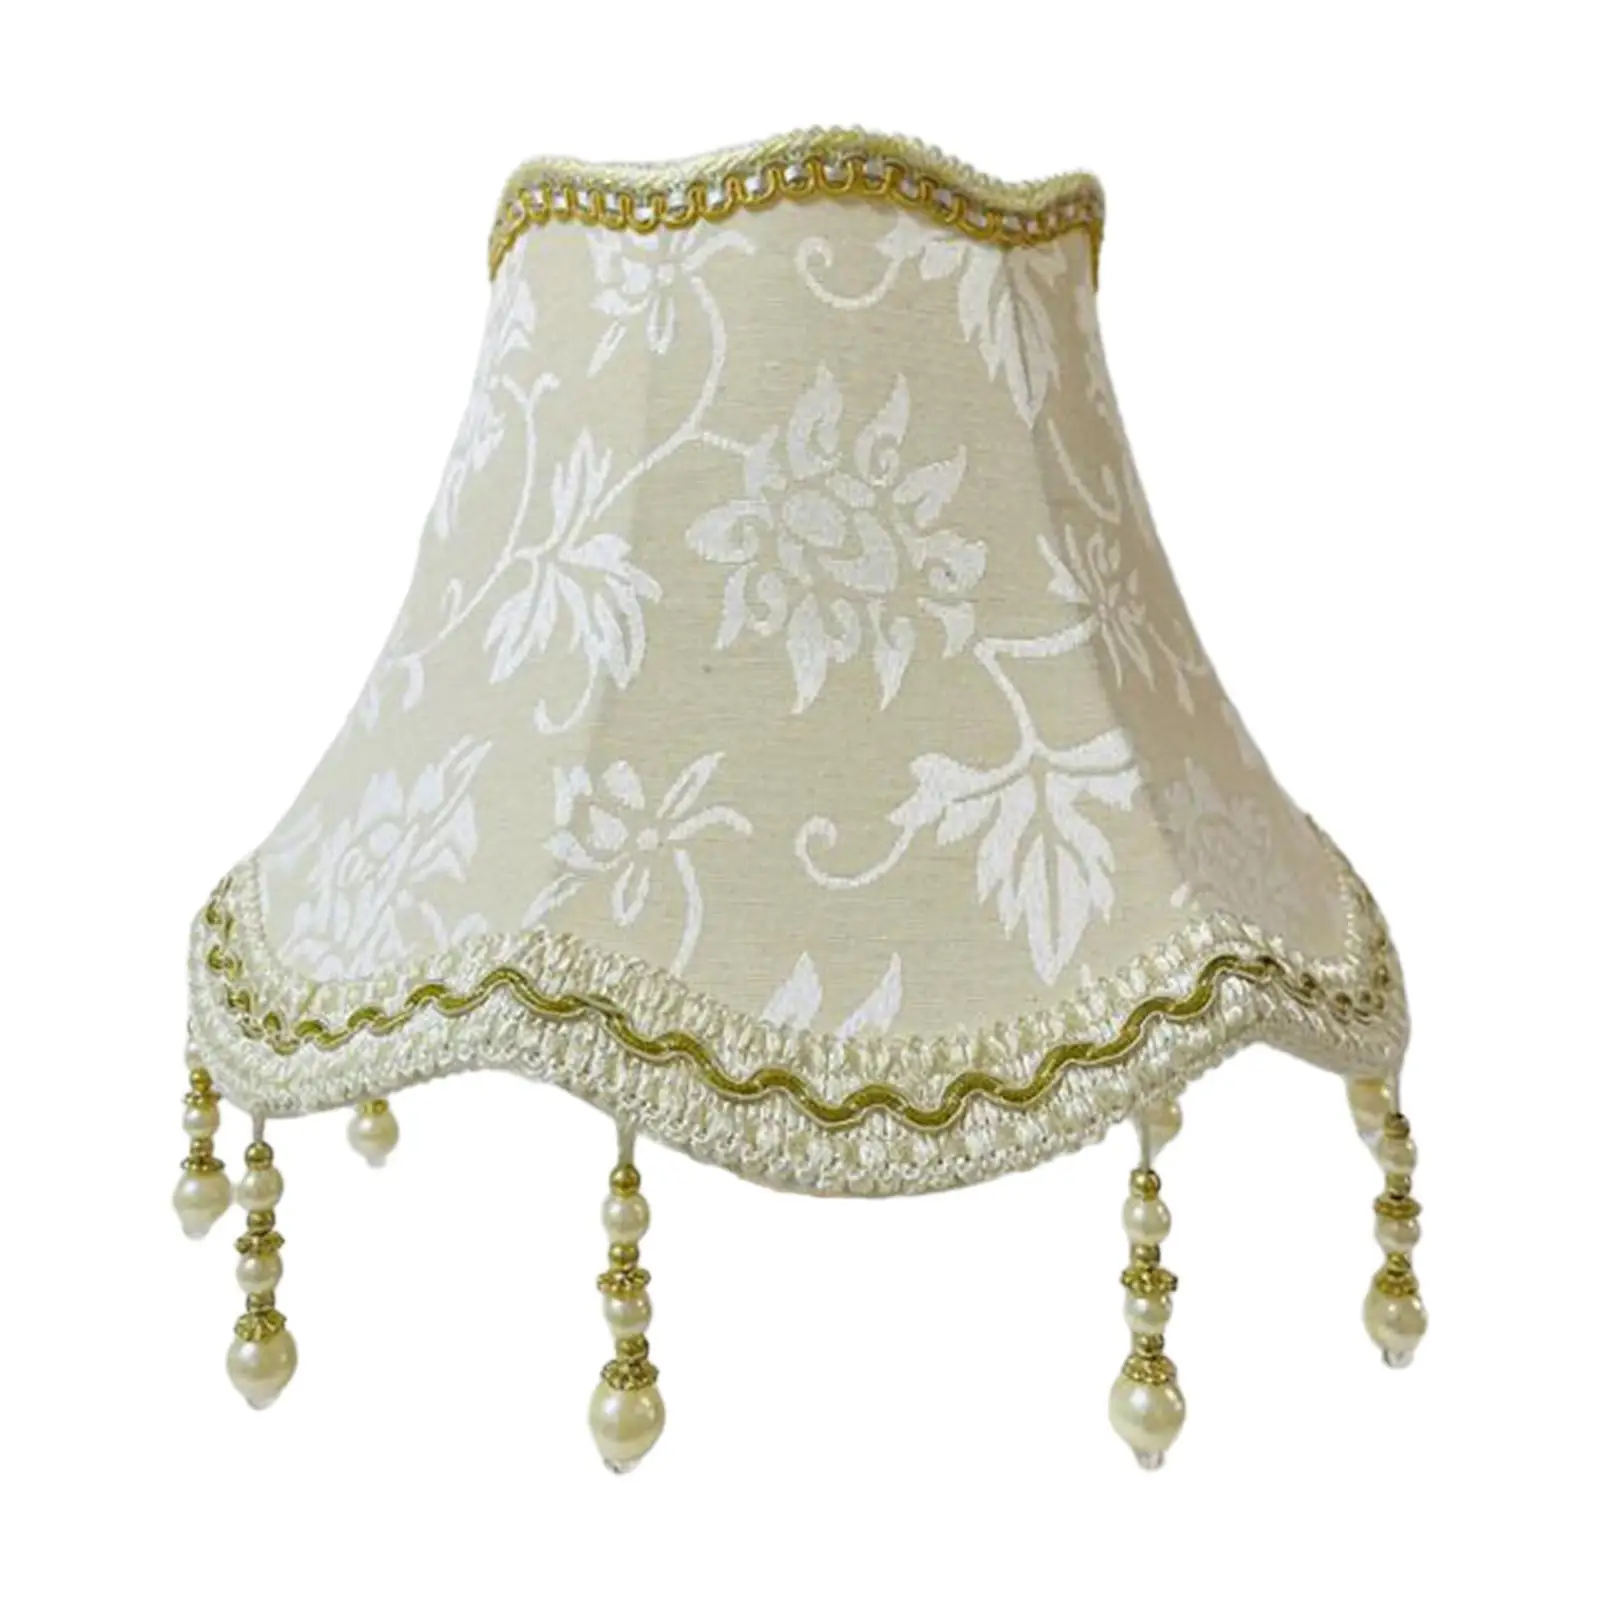 Fabric Lampshade Bedside Lamp Table Lamp E27 Base European Lampshade for Teahouse Bedroom Restaurant Dining Room Kitchen Island